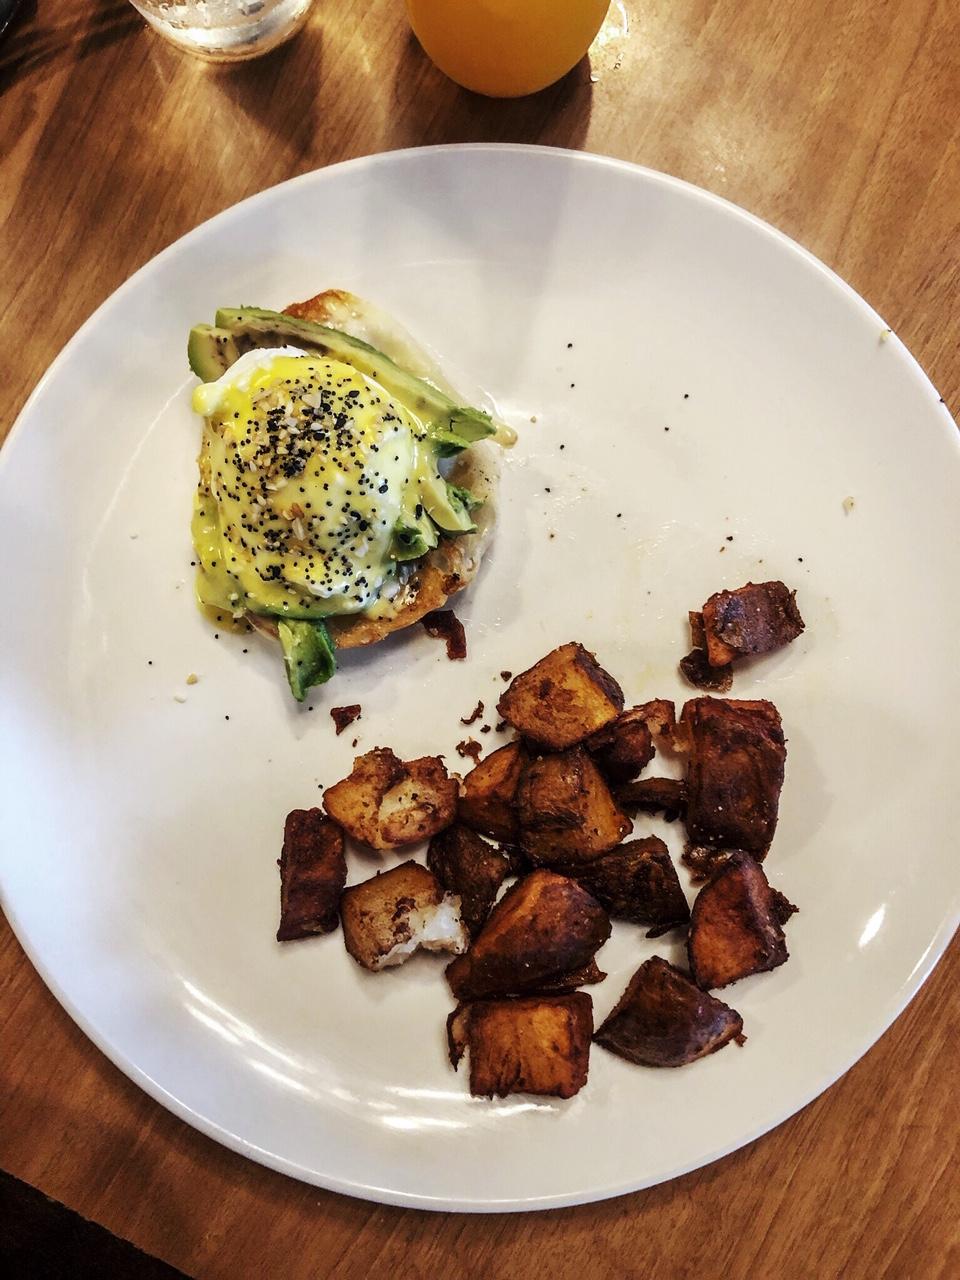 Why you should check out Meggs Cafe in Temple